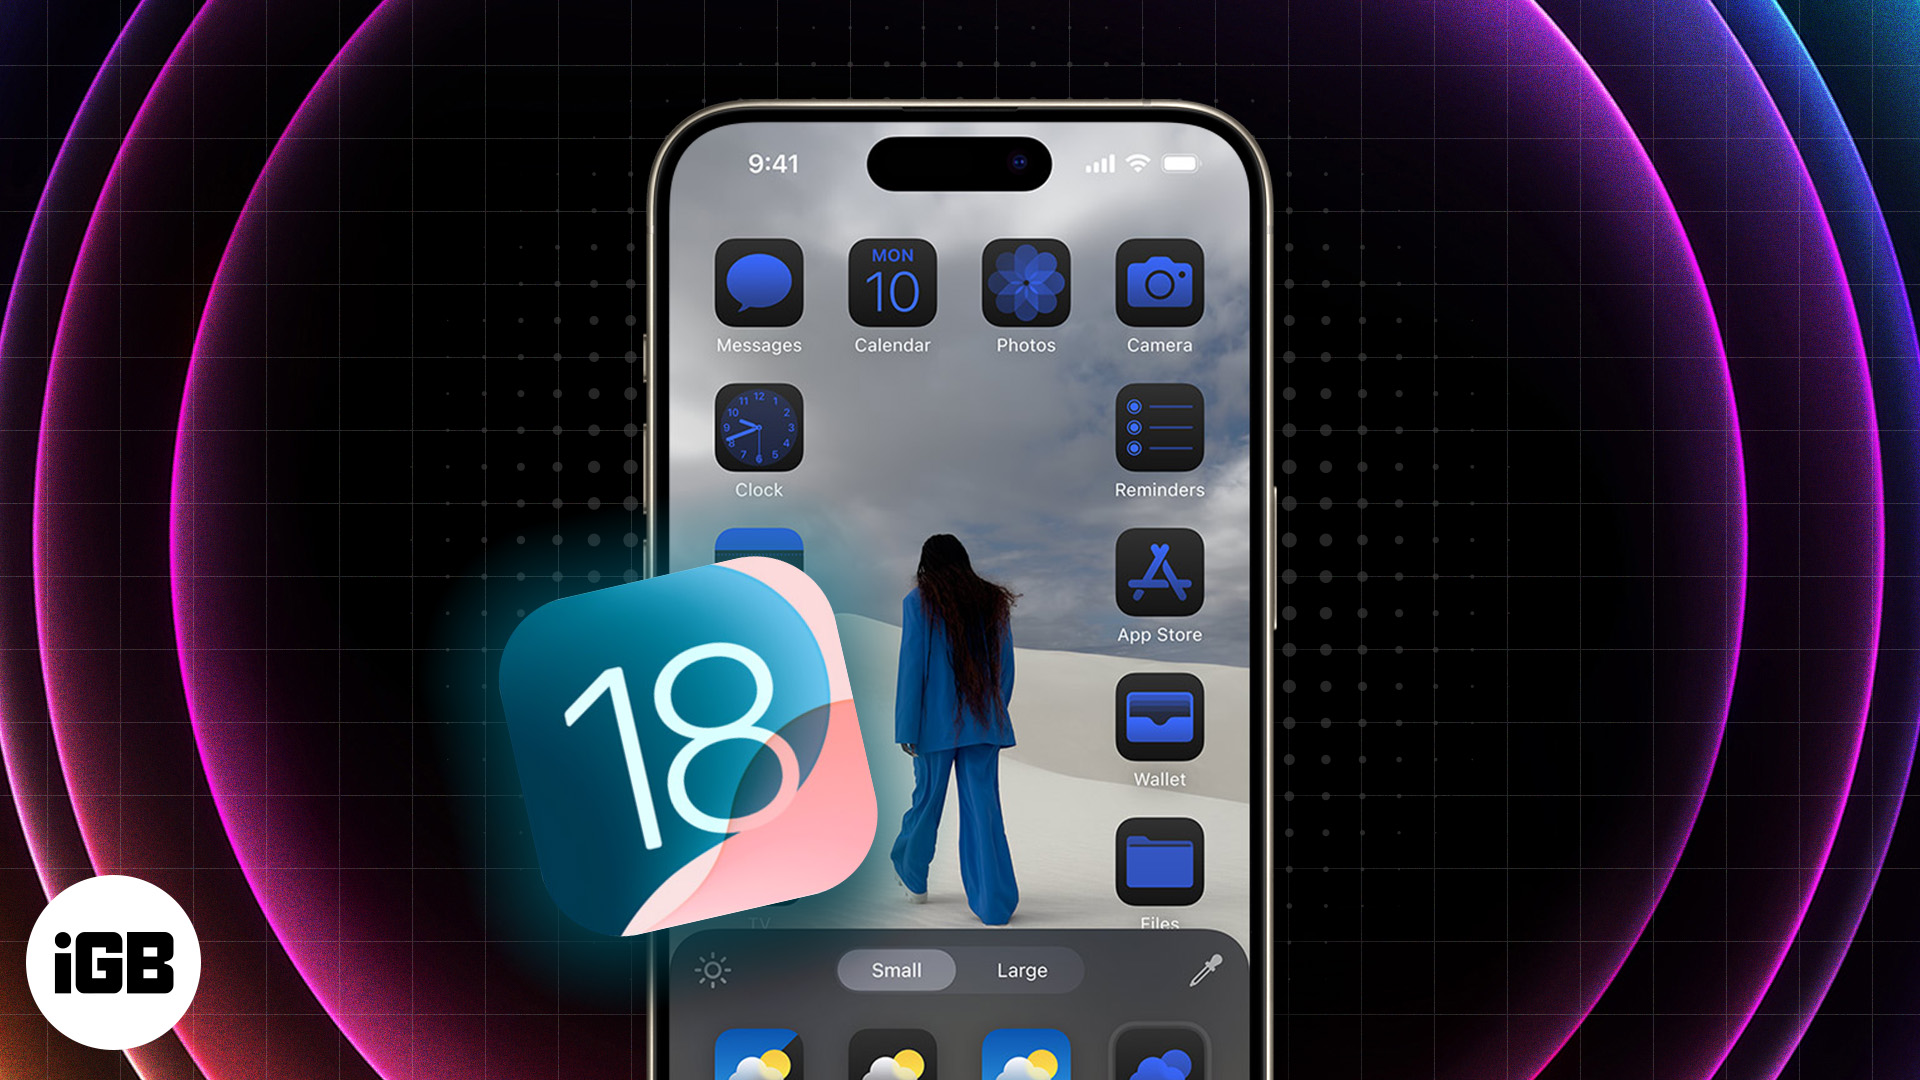 How to customize iPhone Home Screen in iOS 18